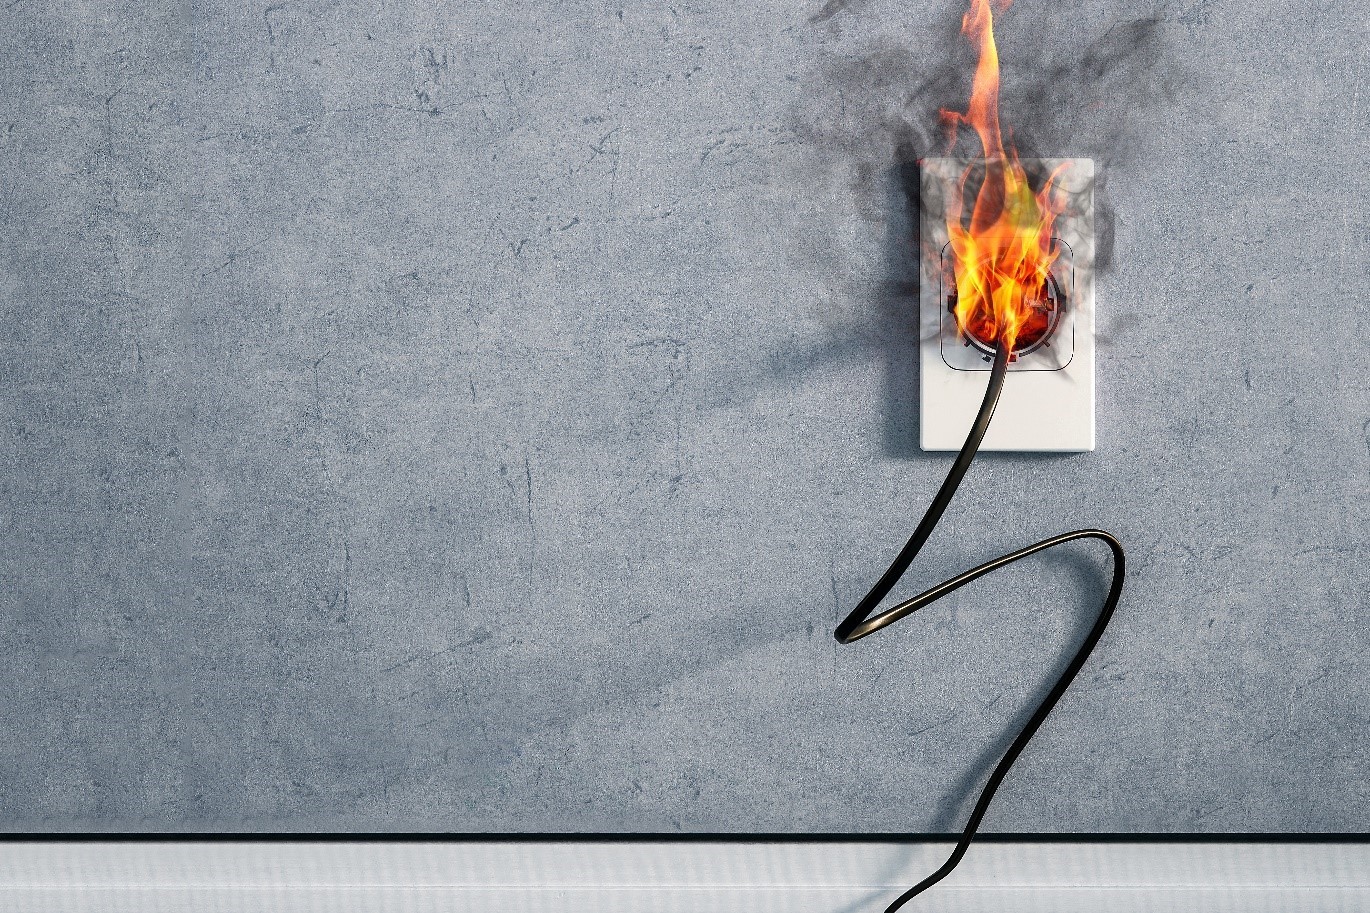 20 Electrical Safety Tips for the Workplace